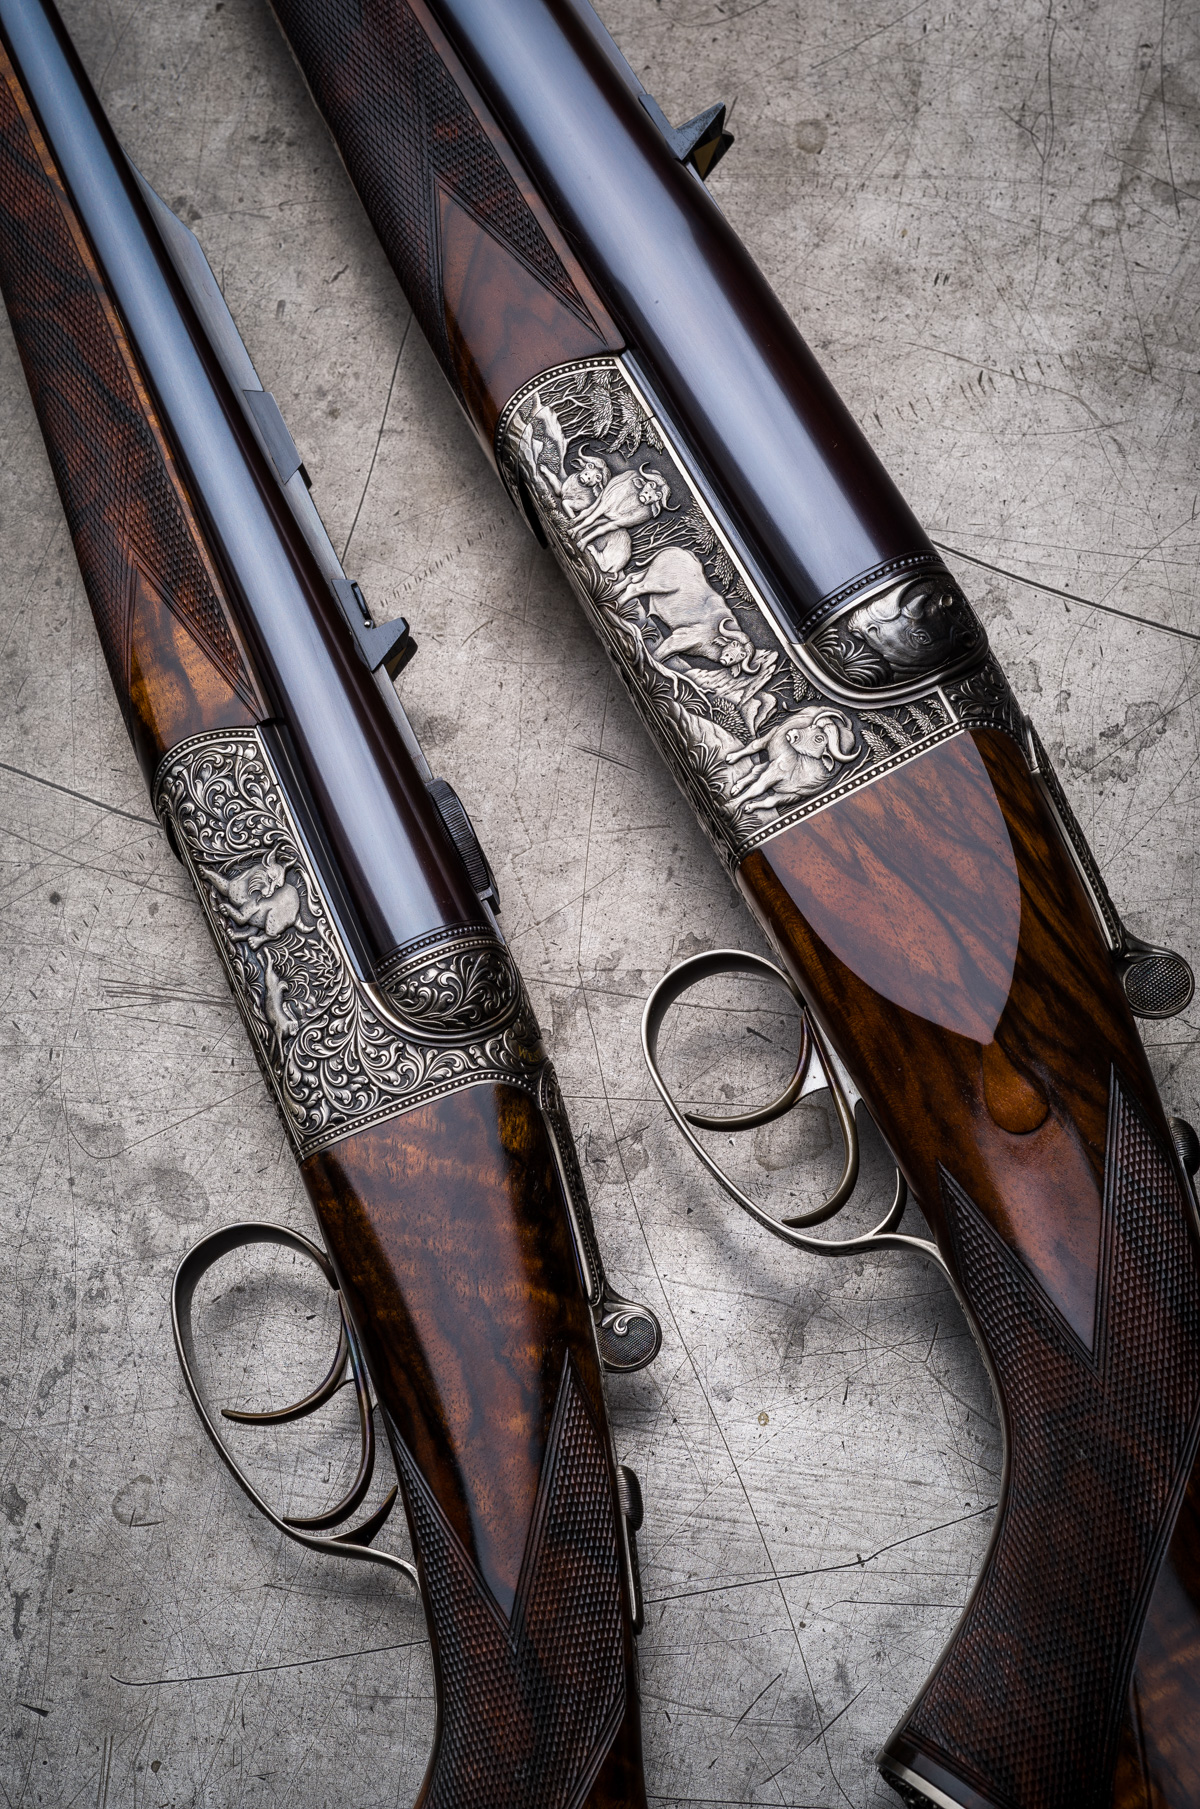 Westley Richards Droplocks in .600 and .243.